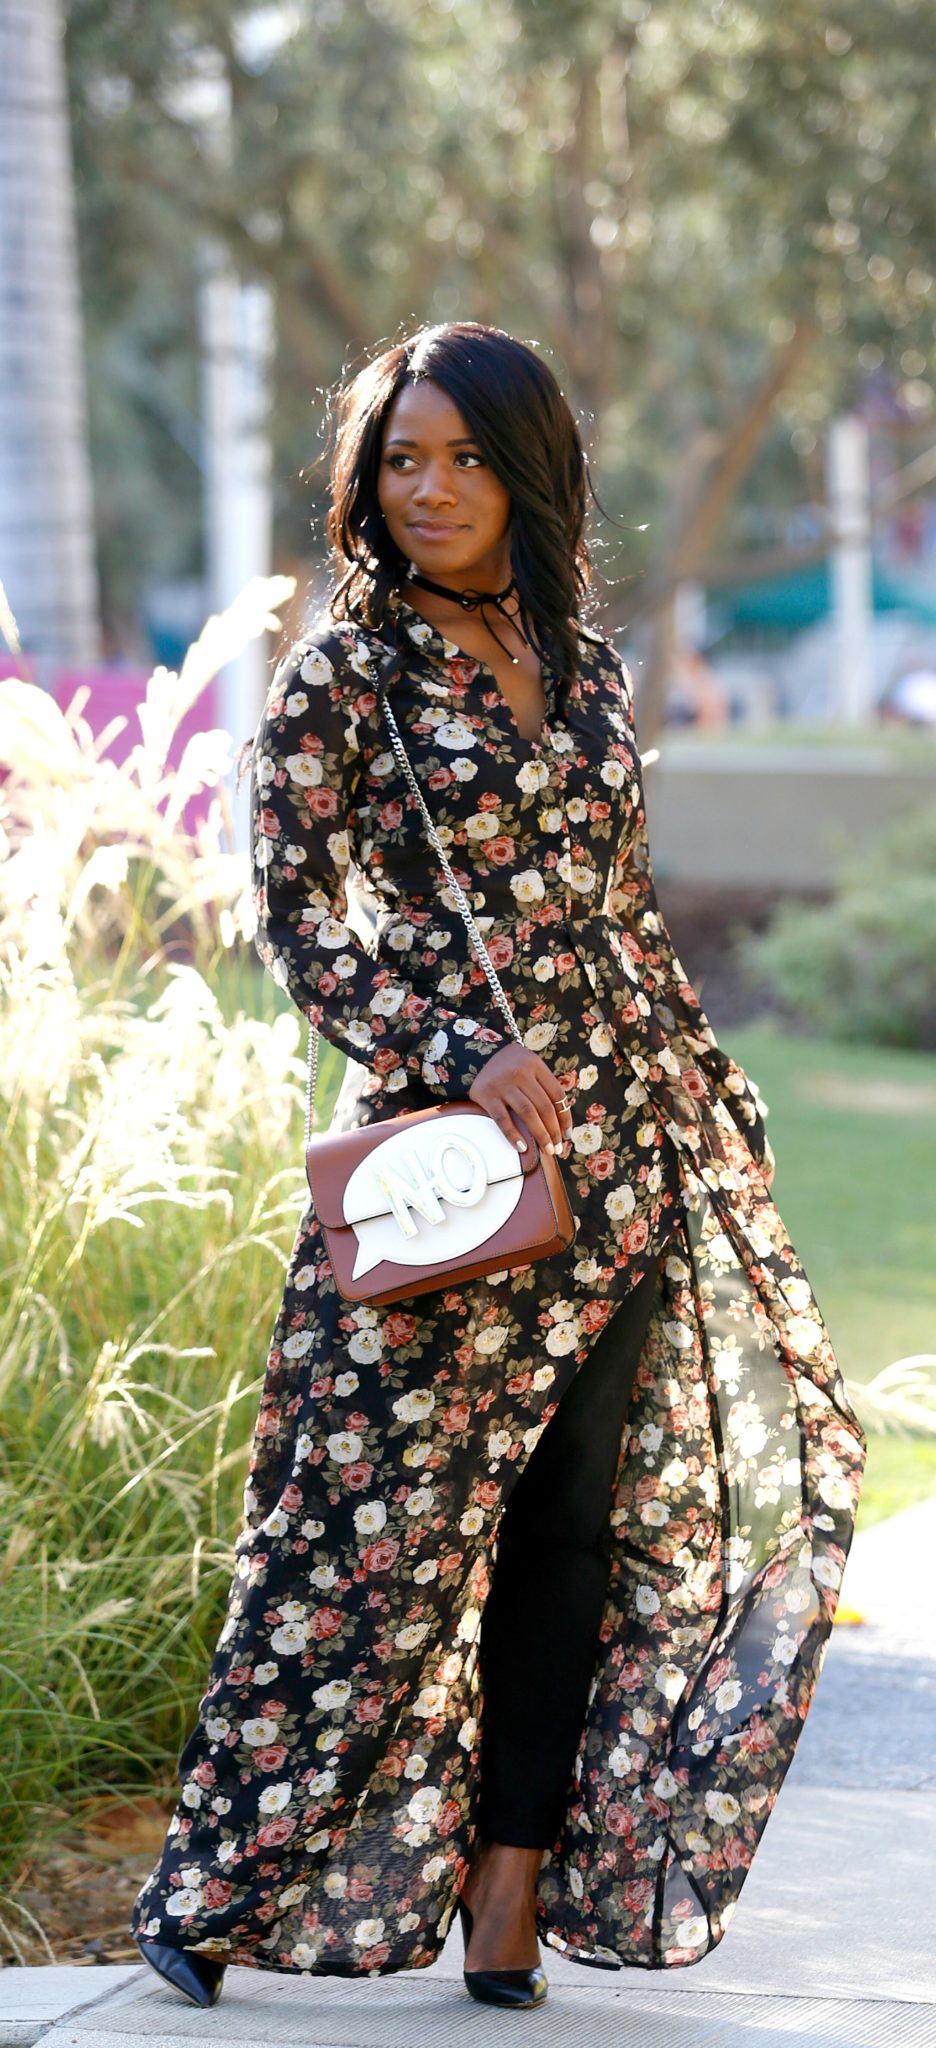 floral-maxi-dress-from-dailylook-full-review-on-downtowndemure-copy